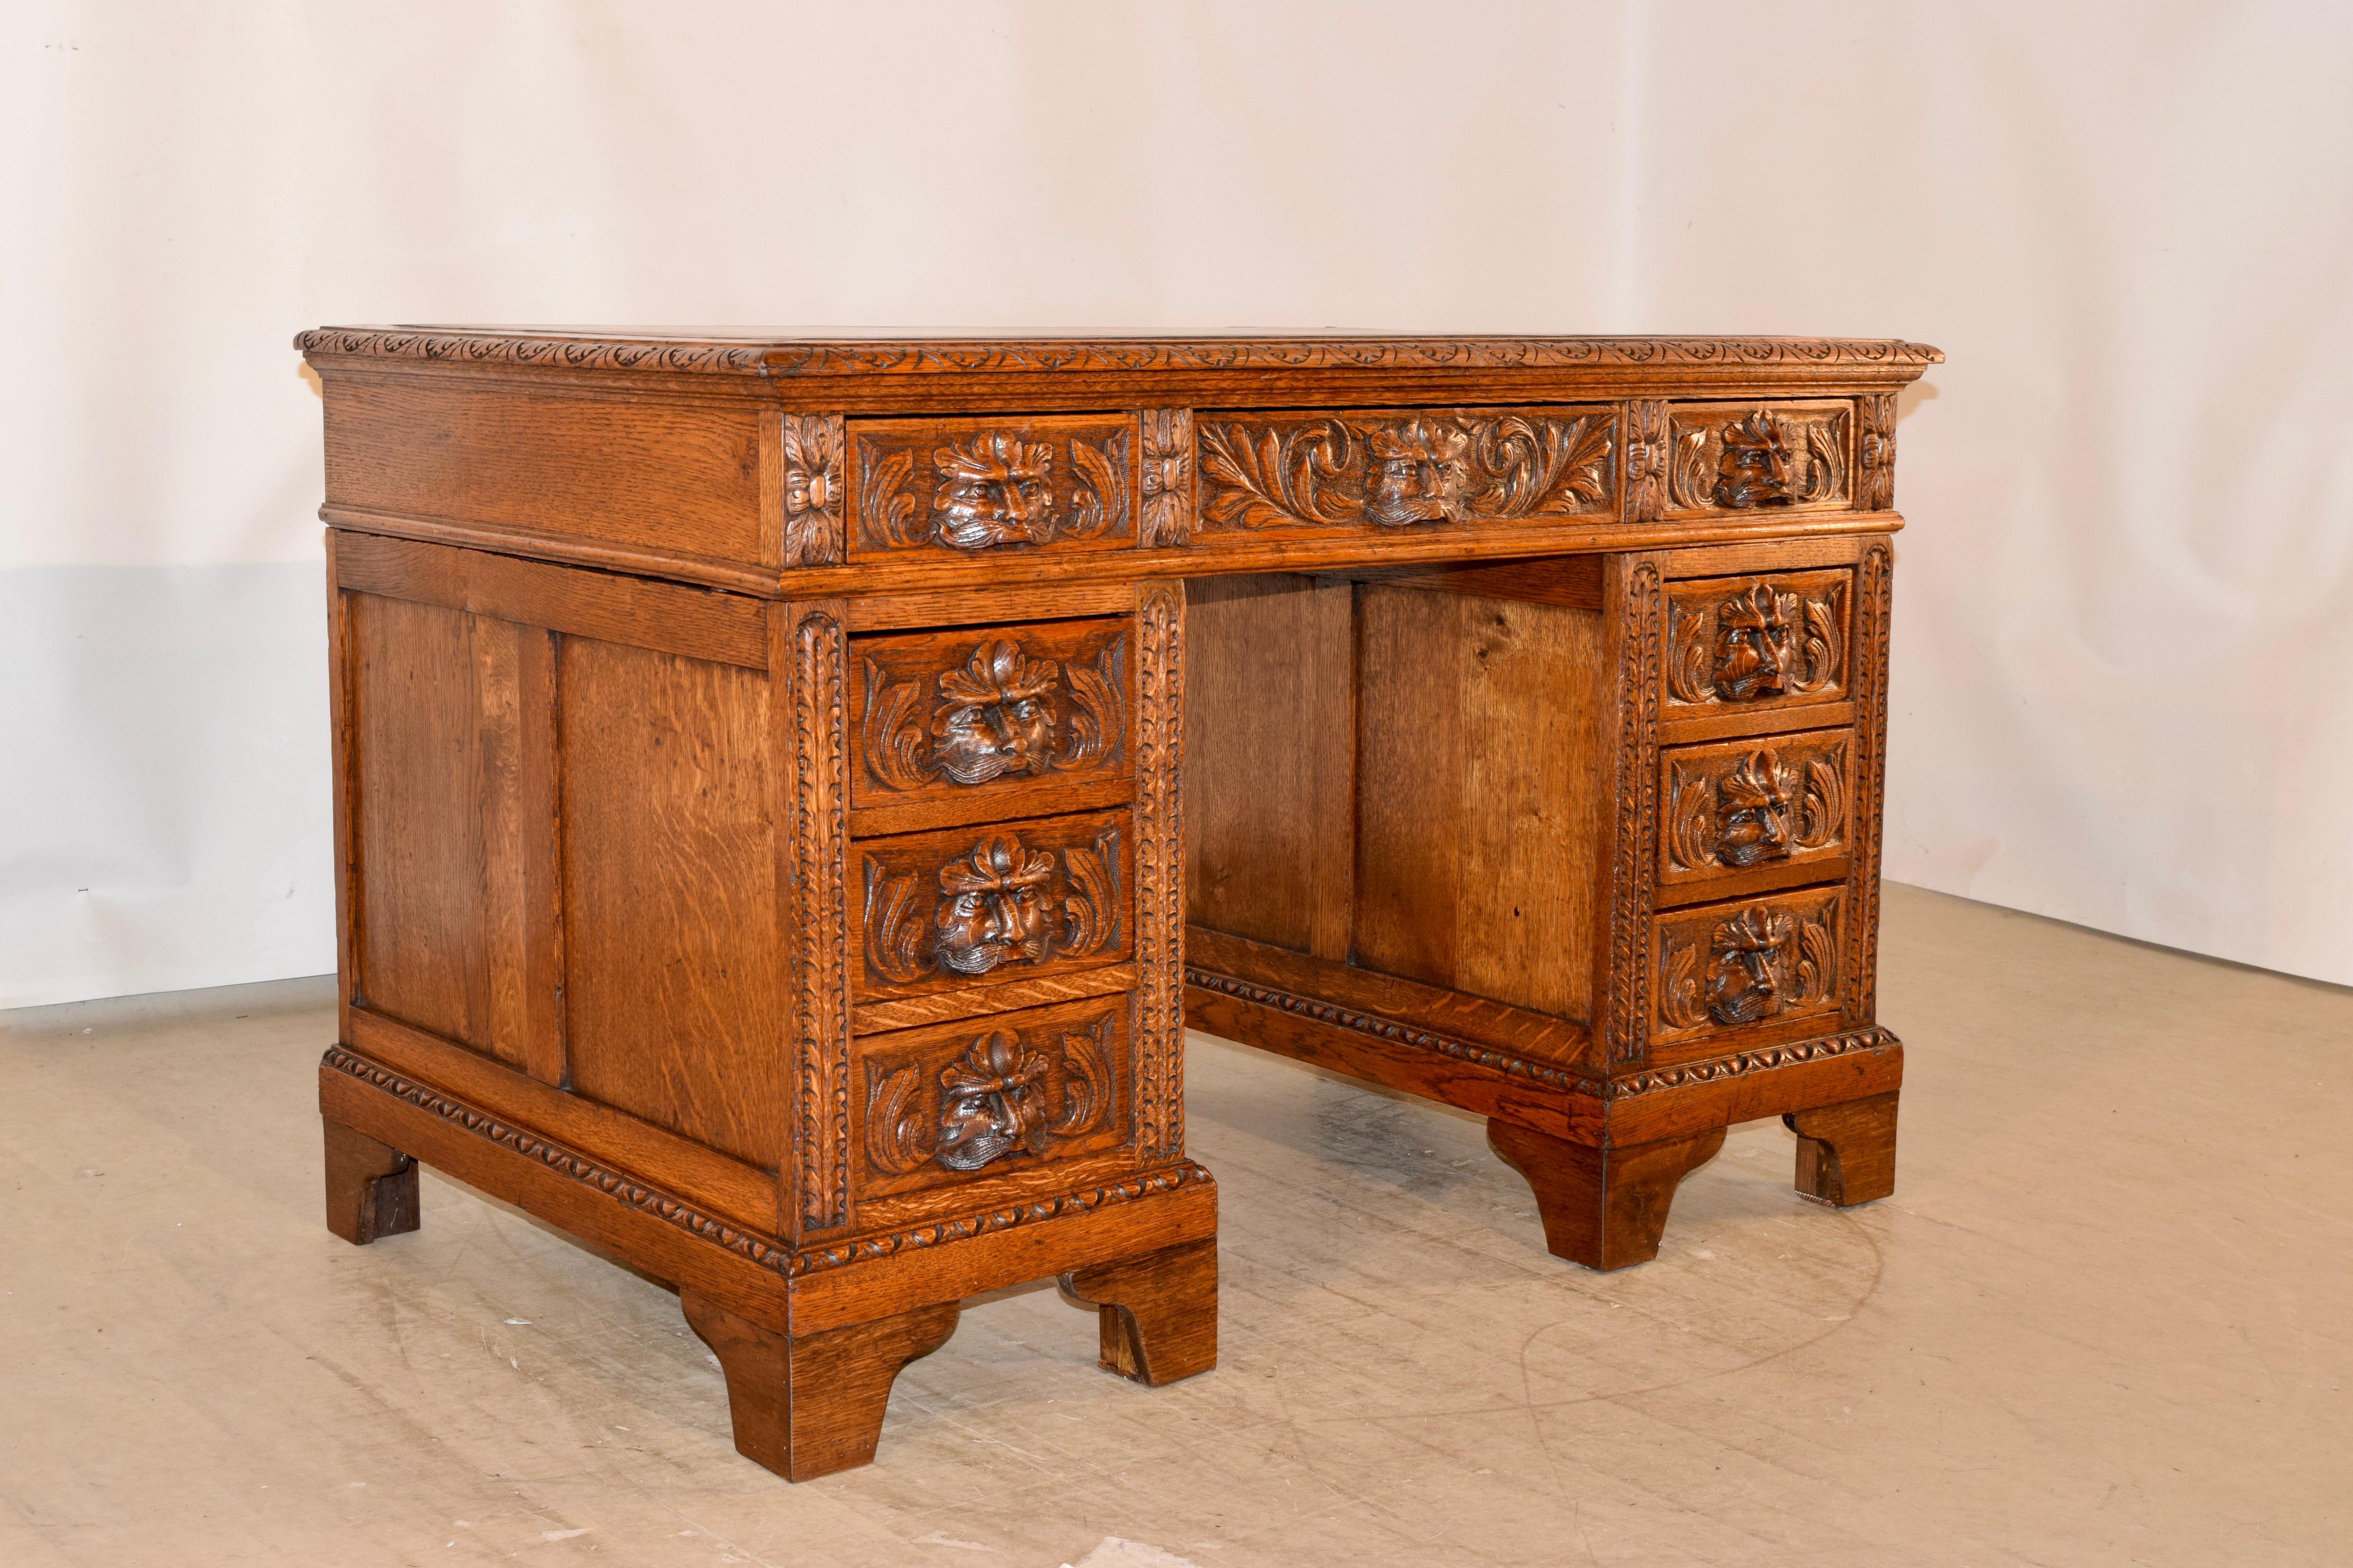 19th century English pedestal desk made from oak. The top is covered in the original brown leather, which has aged beautifully, and is banded by an oak border, which has a gorgeous beveled and carved lunette edge. The desk is in a wonderfully